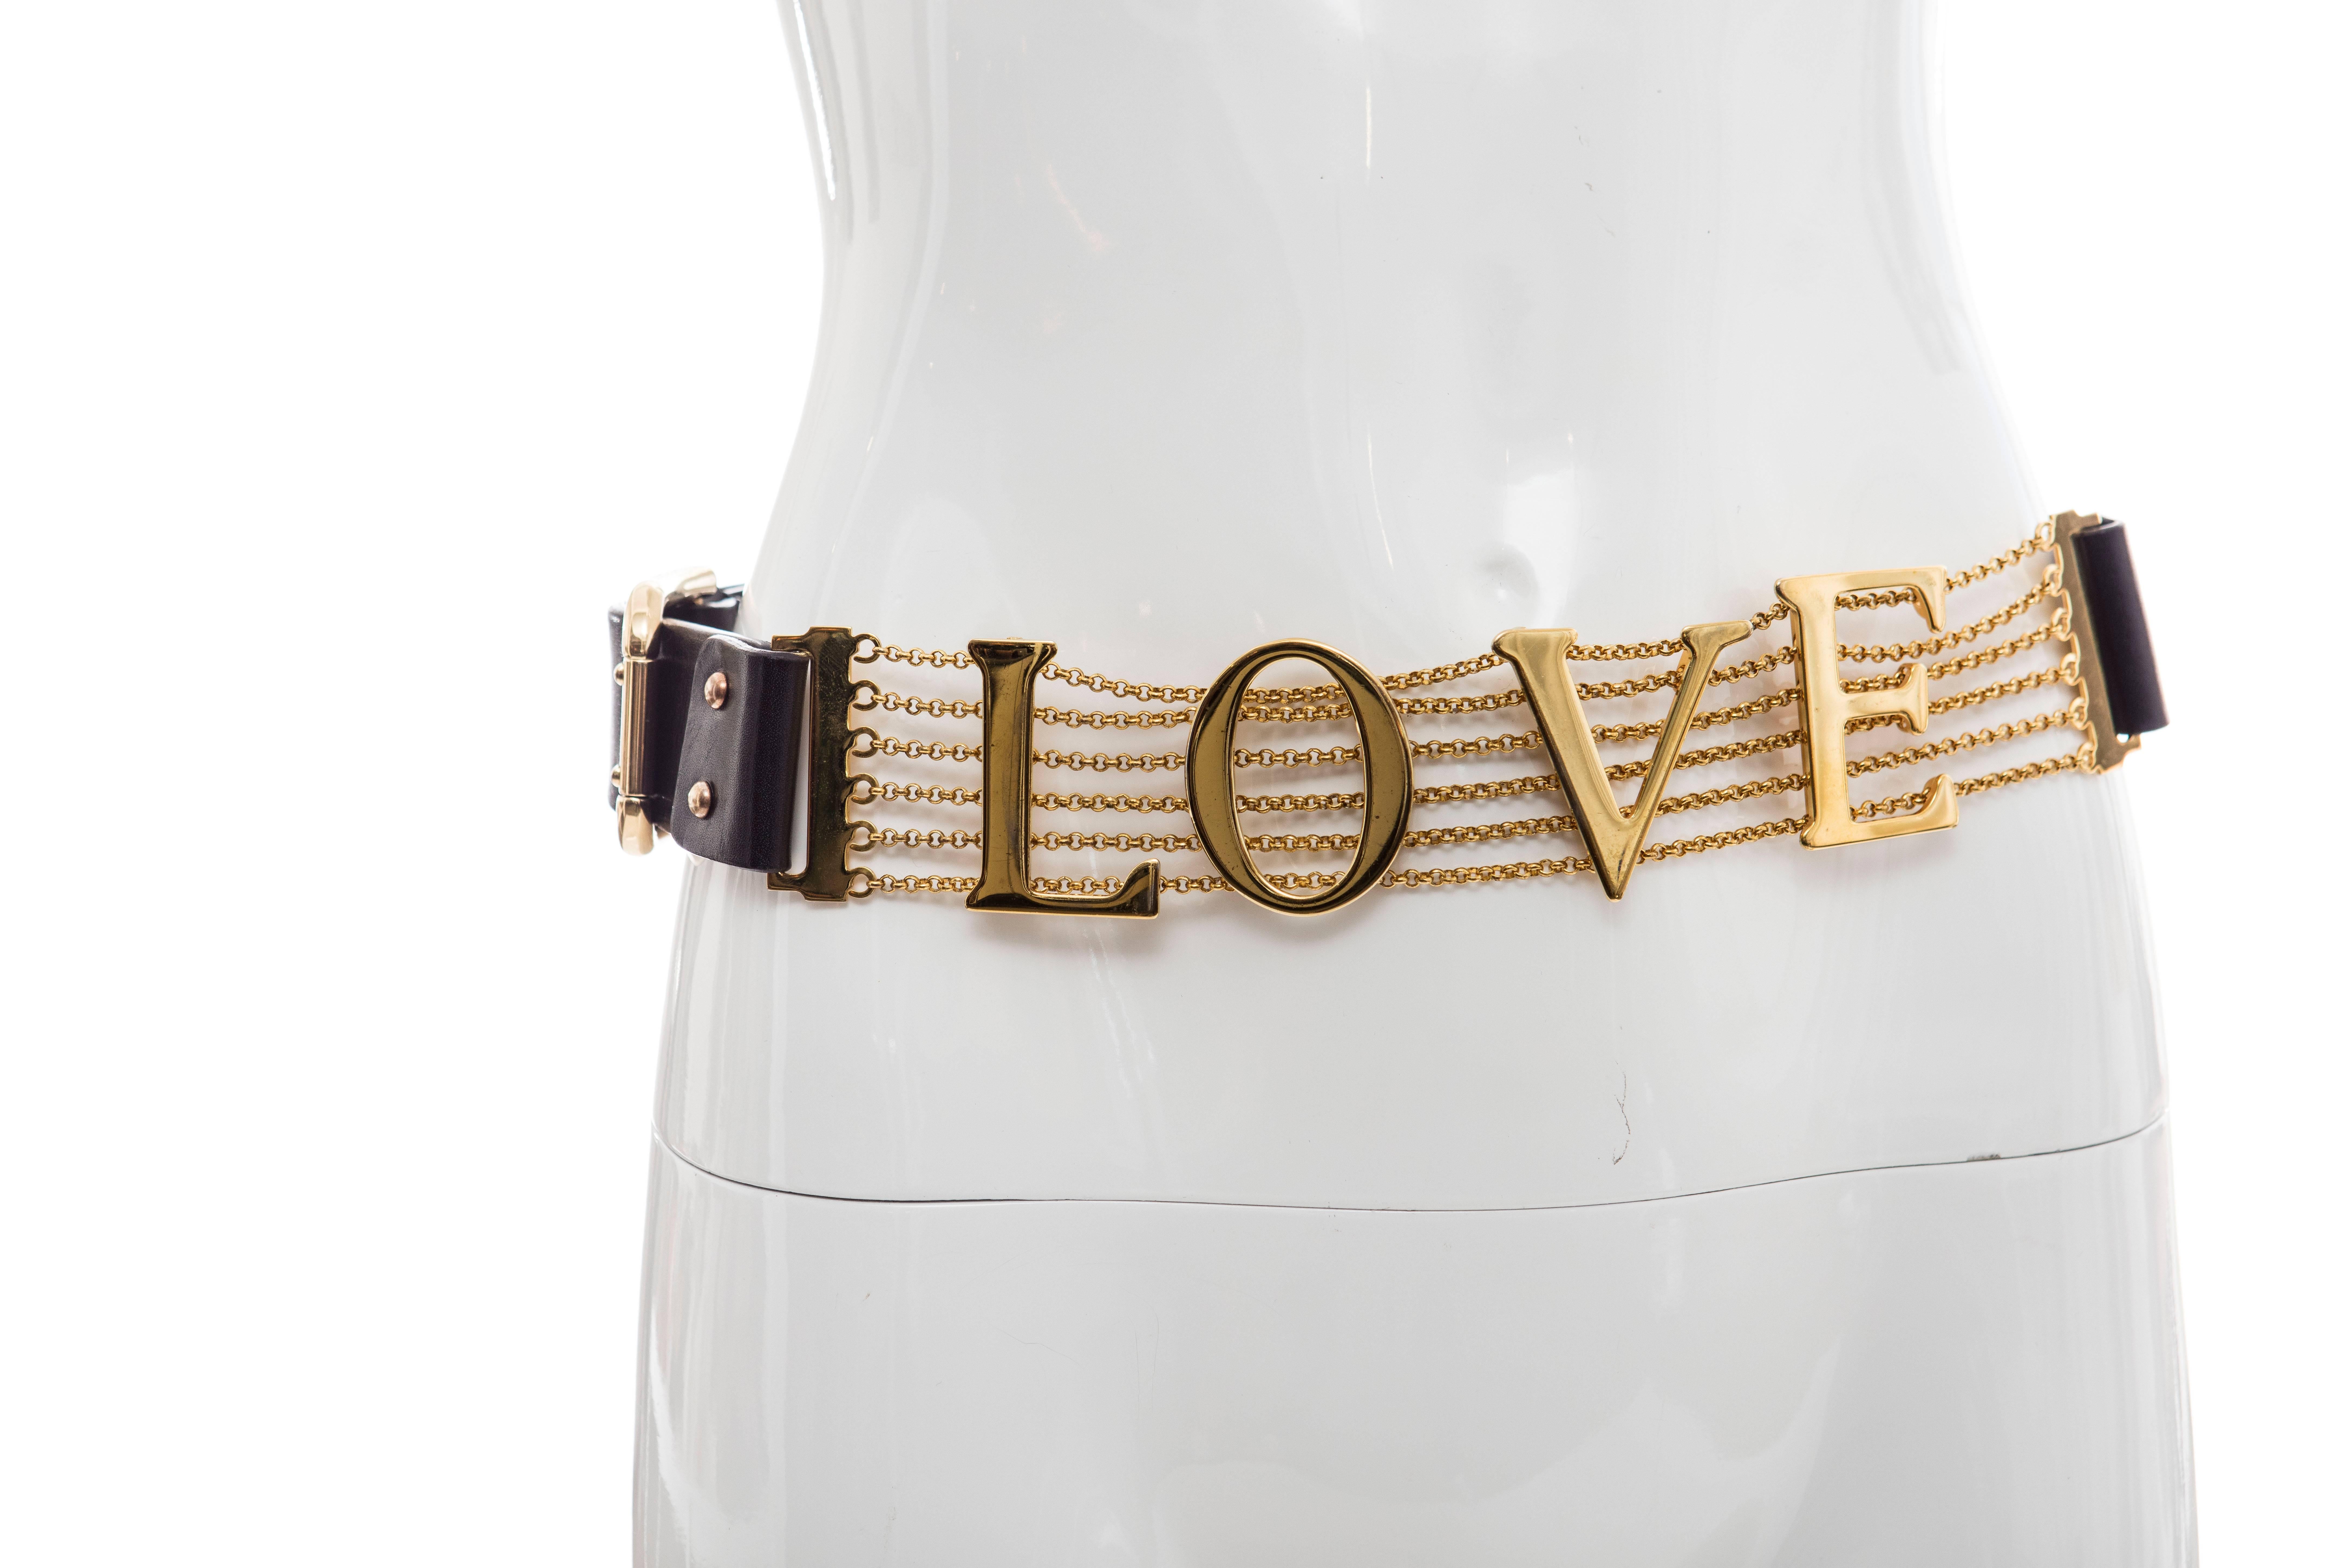  Dolce & Gabbana, Spring-Summer 2003 black leather belt with gold-tone hardware, chain-link embellishment at trim featuring 'LOVE' adornment and buckle closure.

Length Min: 32.25